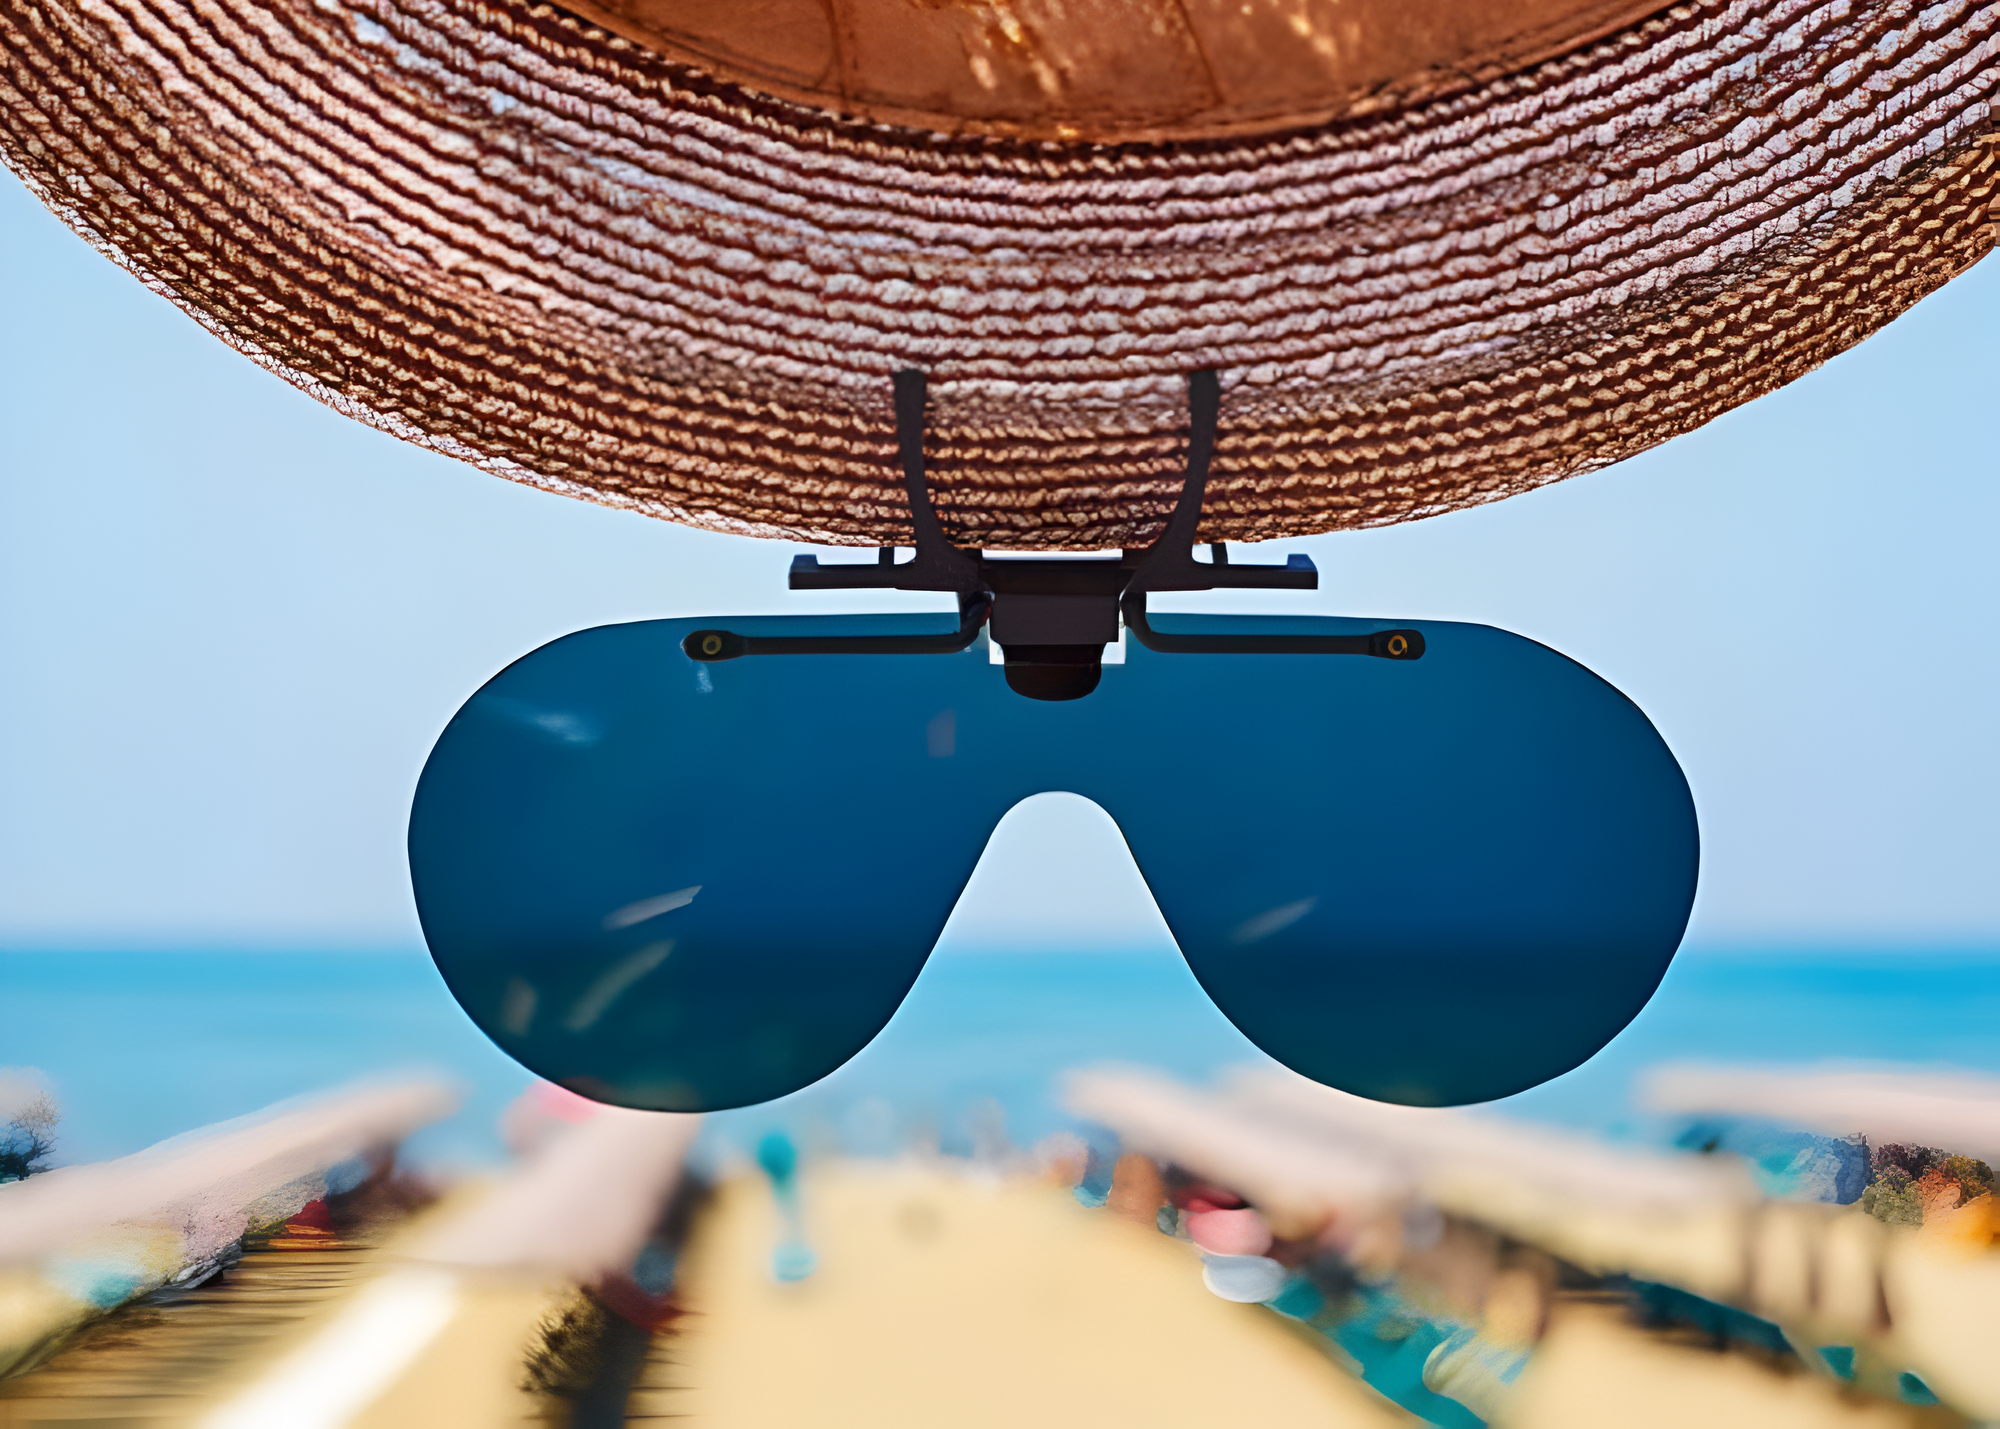 WHAT DOES POLARIZED SUNGLASSES OR LENS MEAN?